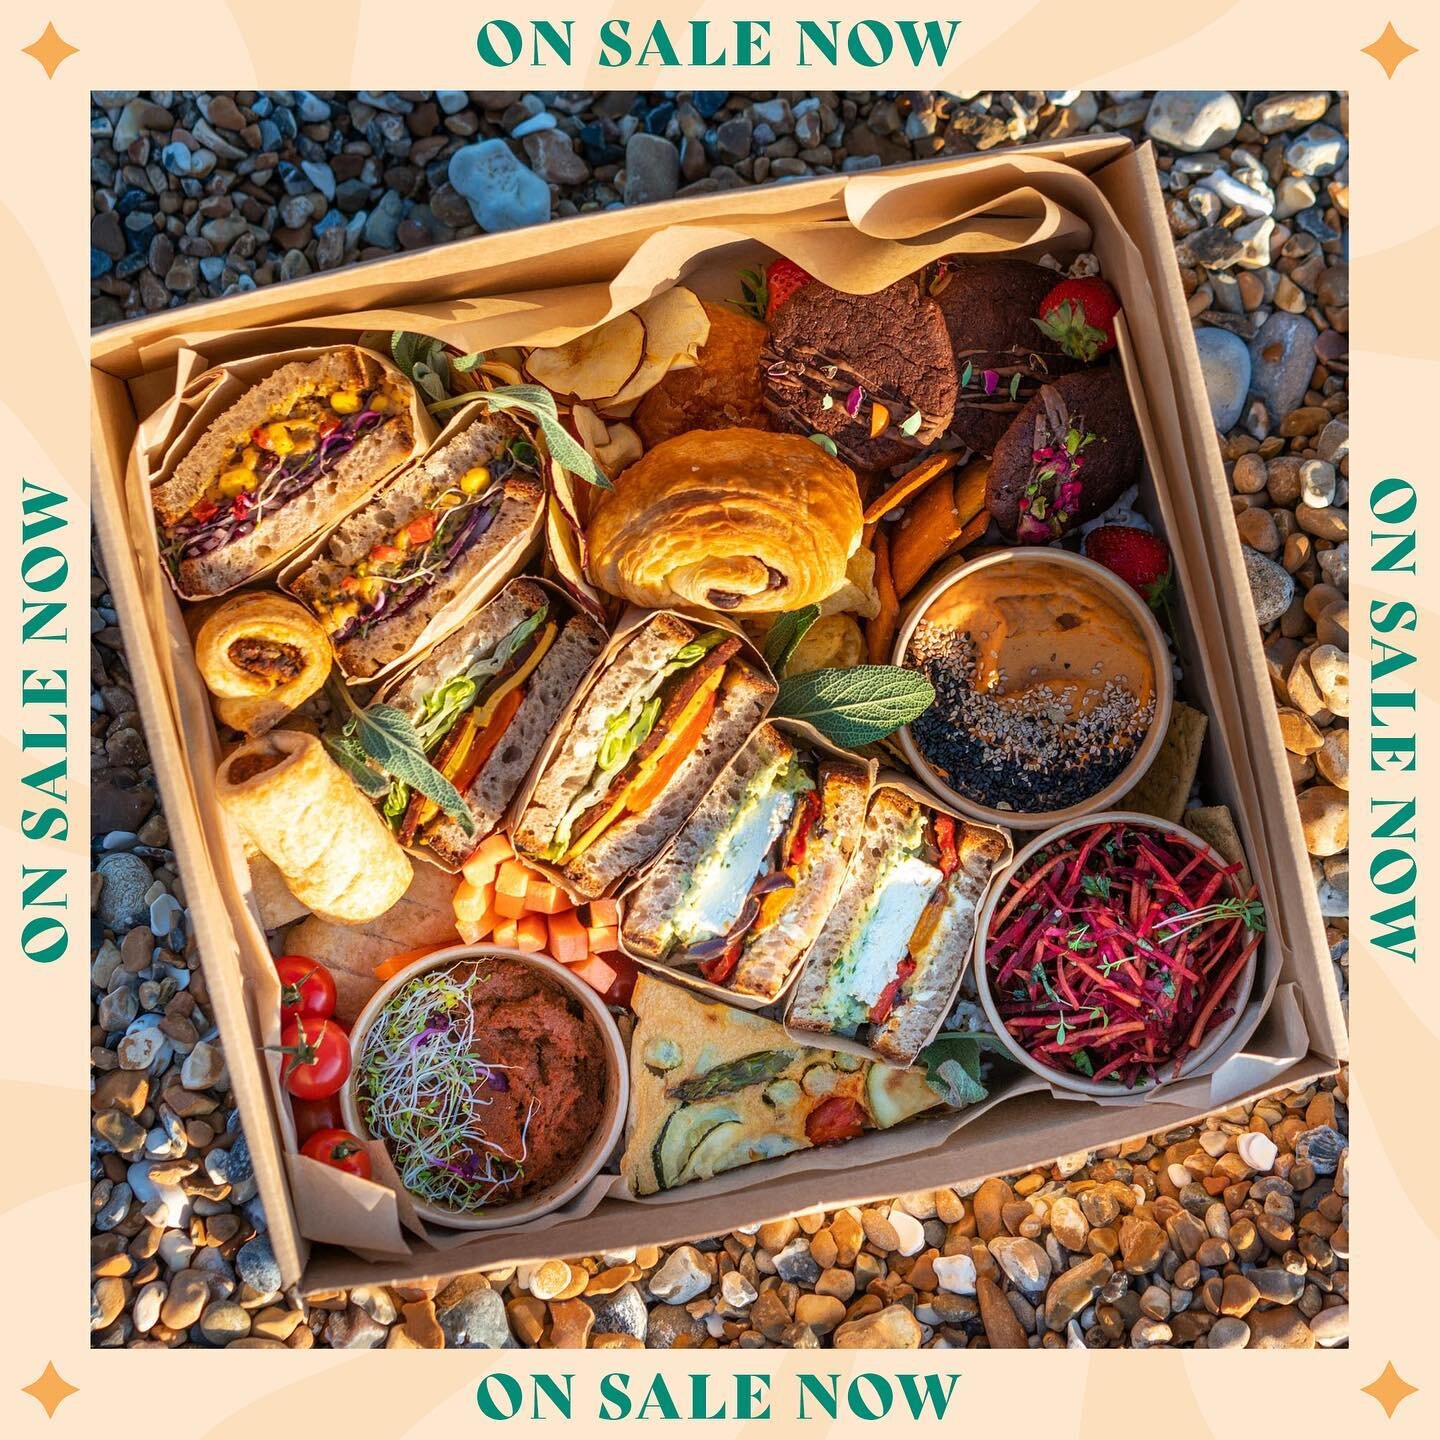 Vegan Artisan Picnic Boxes available now from @tothemoonandsnack_ !!

Thank you so much to those of you who have already supported me, @chiara_pastrychef and @twskelton in our new business venture by following, sharing and sending lovely messages. It